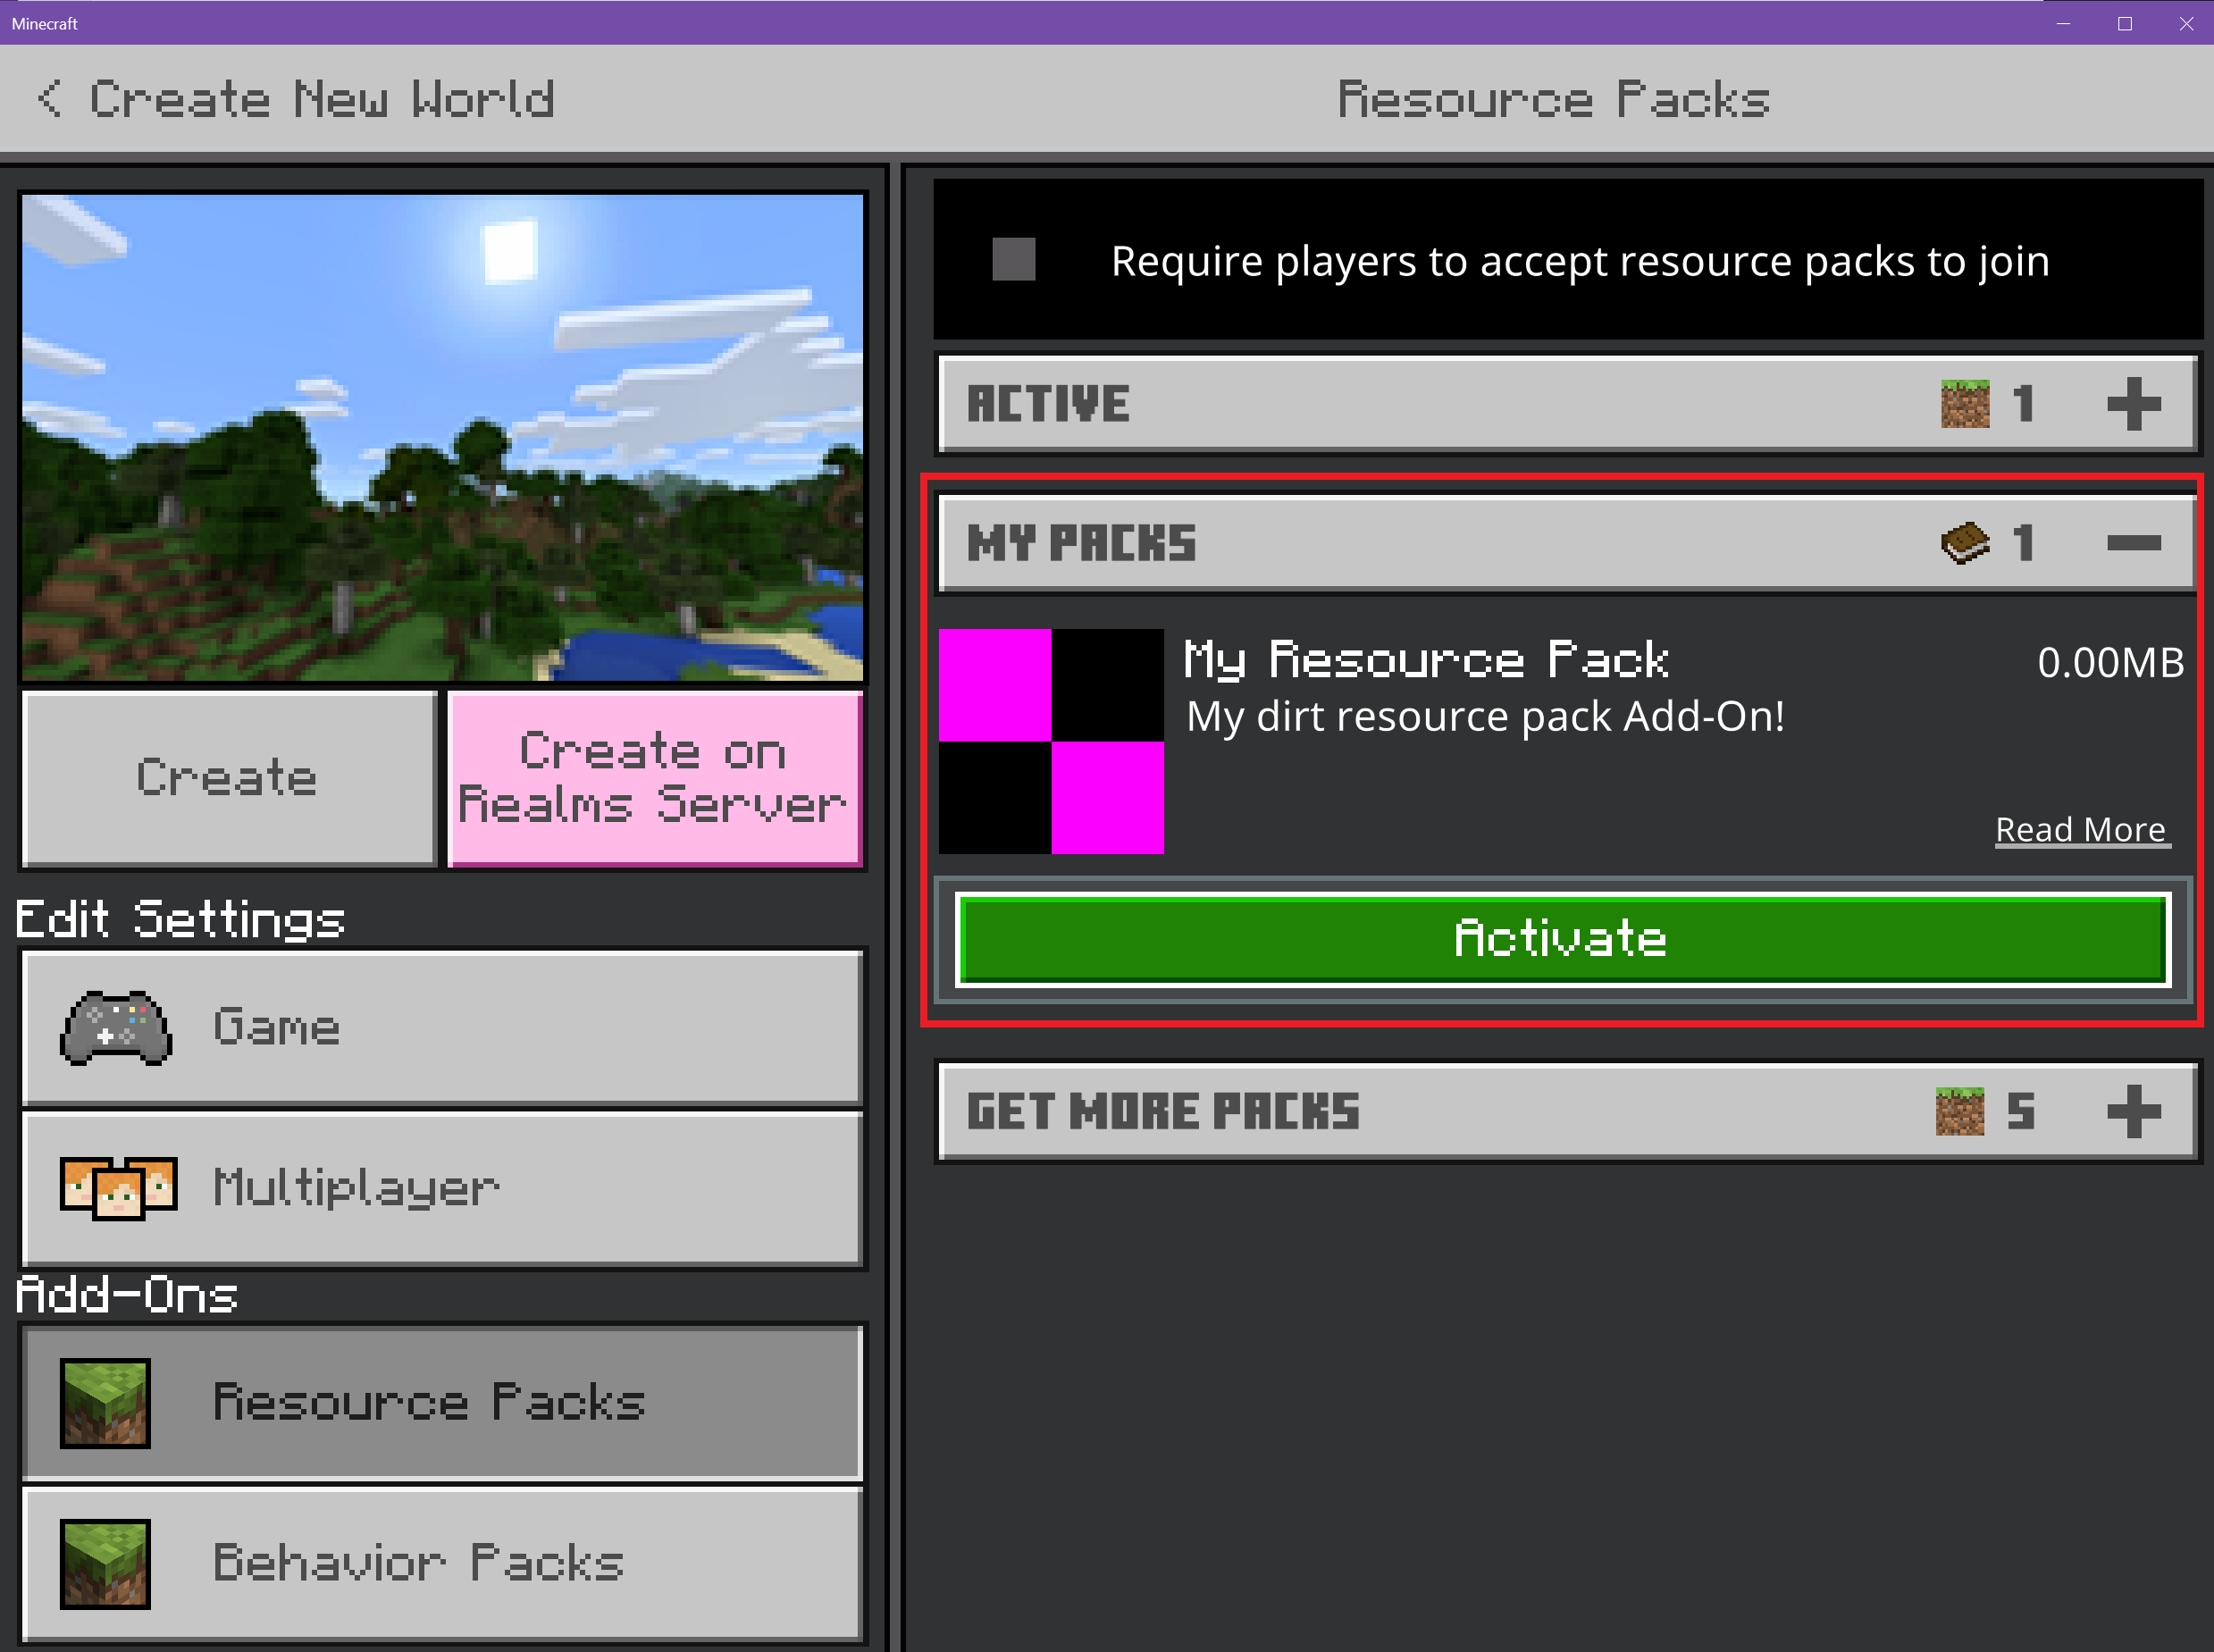 Image of Minecraft's Settings page with the Add-On menu selected for resource packs. There is a red rectangle outlining My Resource Pack and the Activate button.